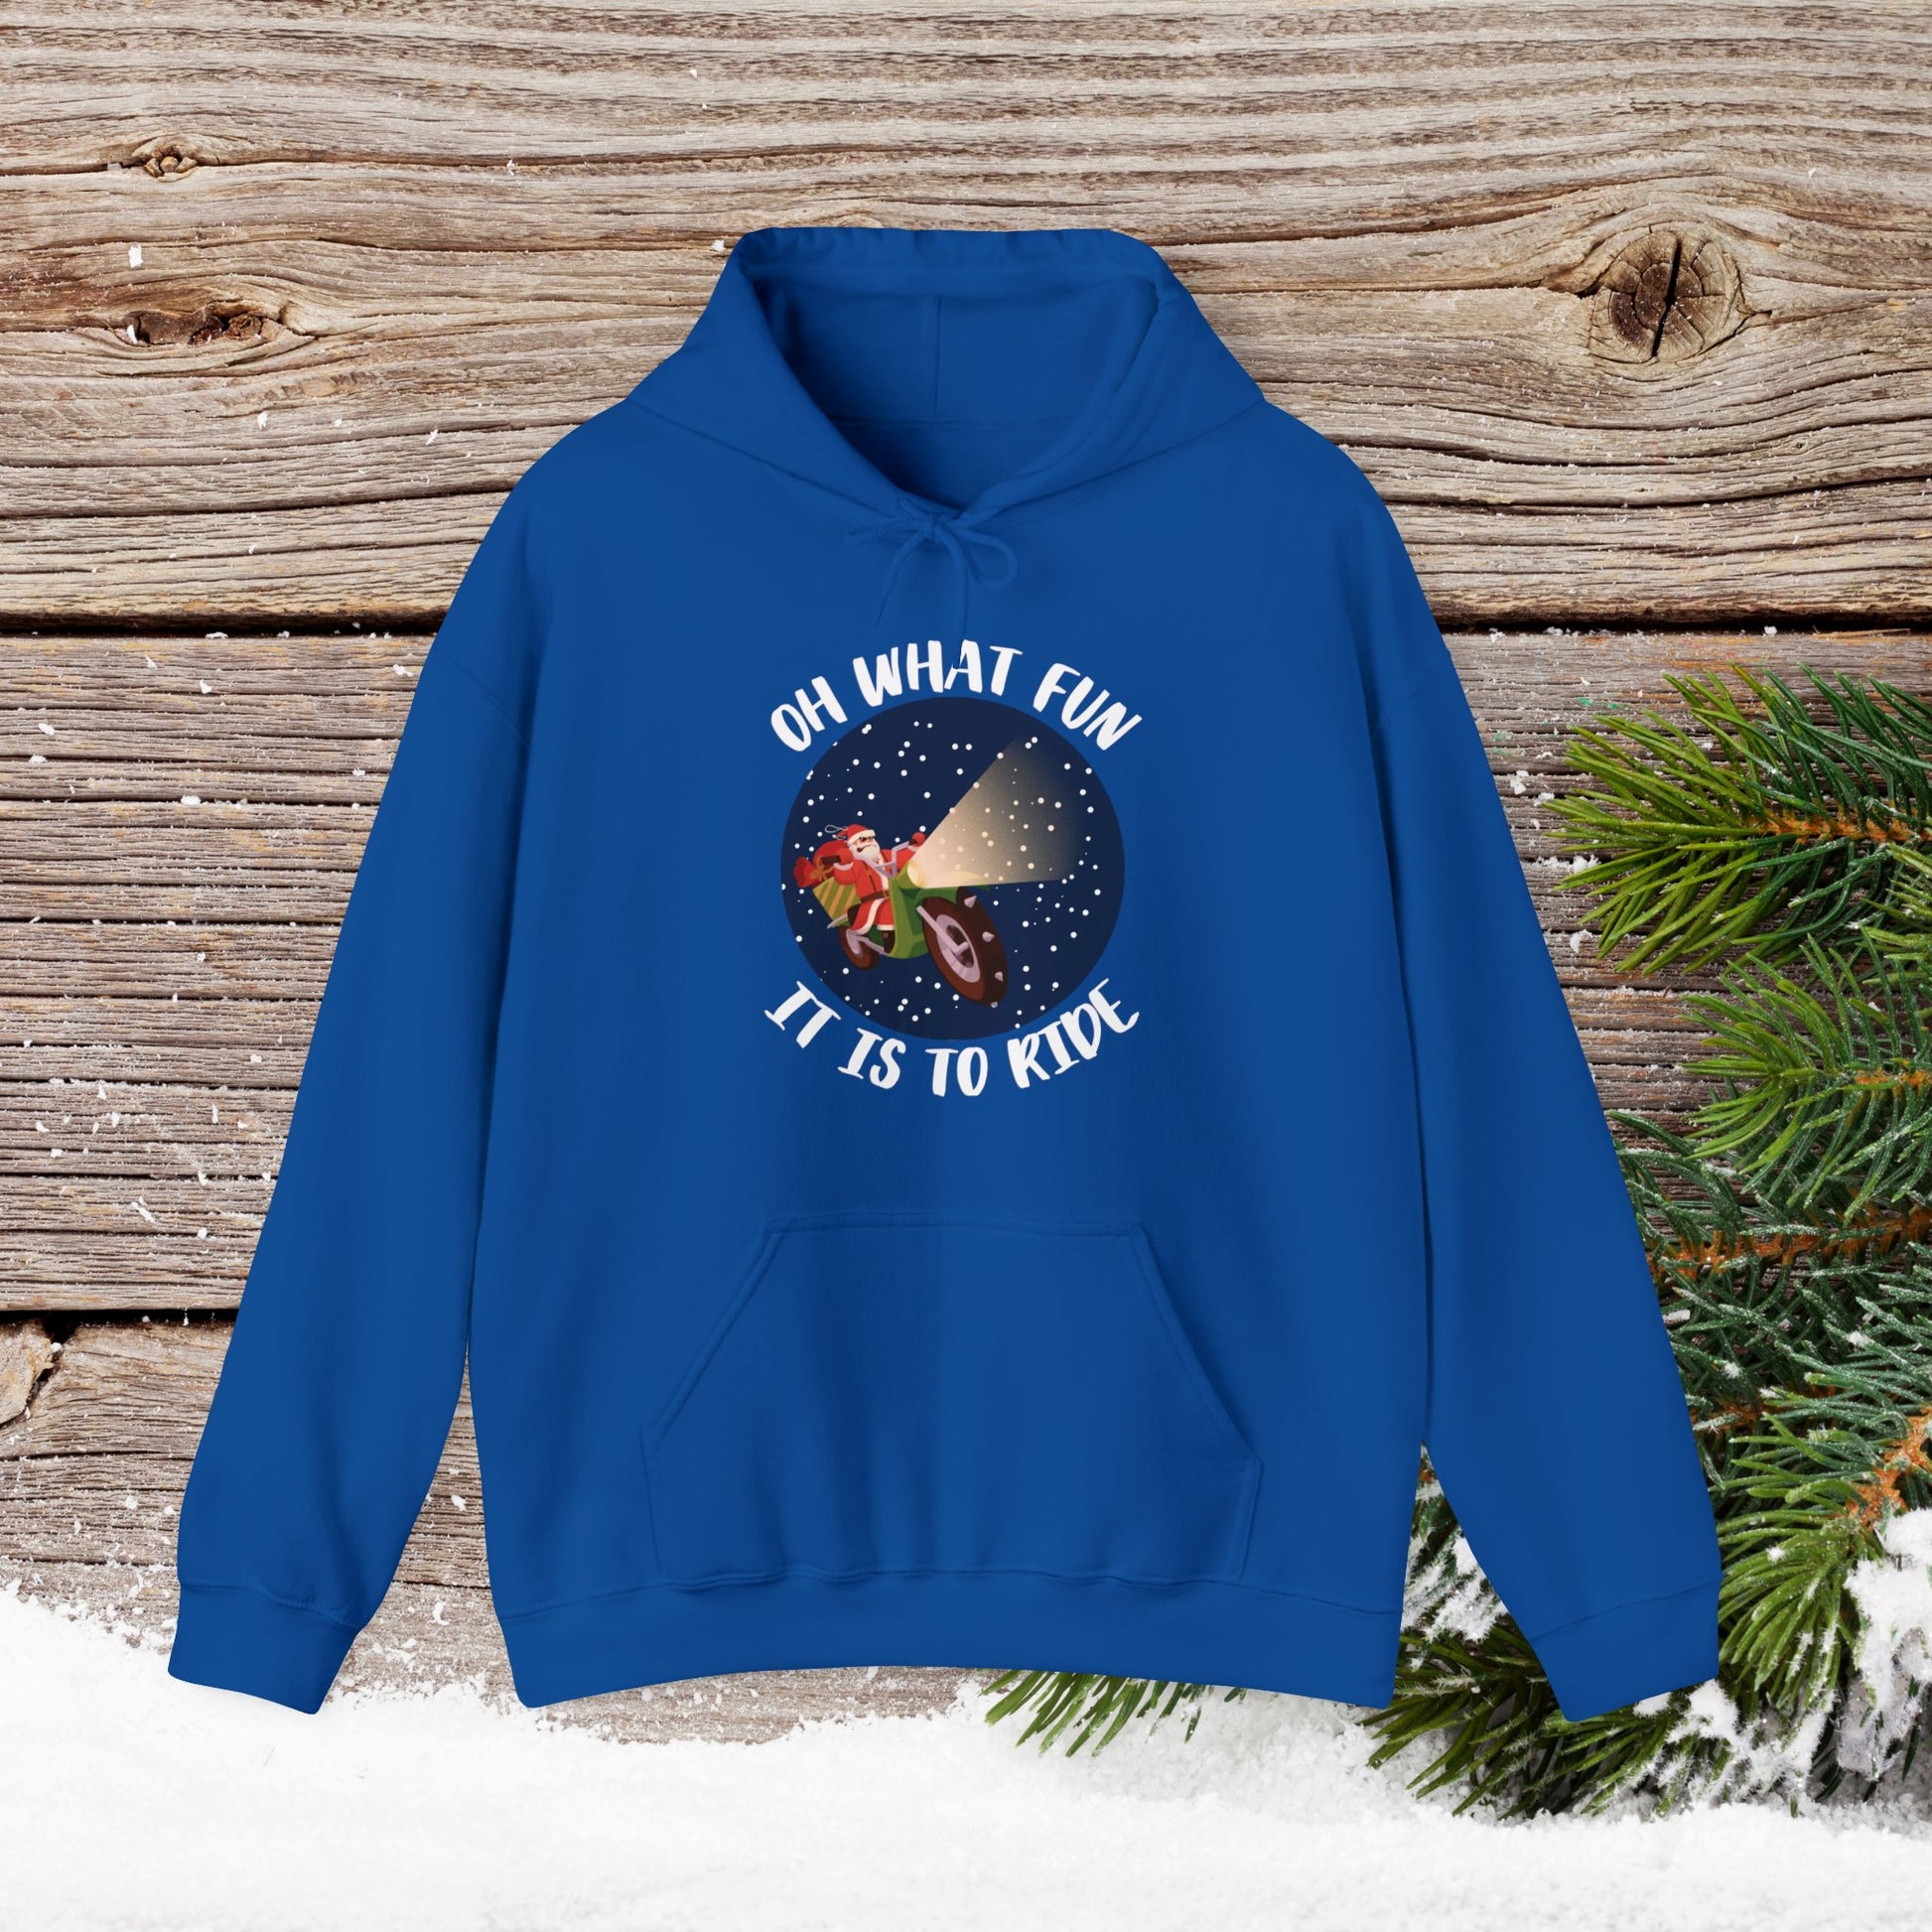 Christmas Hoodie - Oh What Fun It Is To Ride - Mens and Boys Christmas Shirts - Youth and Adult Christmas Hooded Sweatshirt Hooded Sweatshirt Graphic Avenue Royal Adult Small 